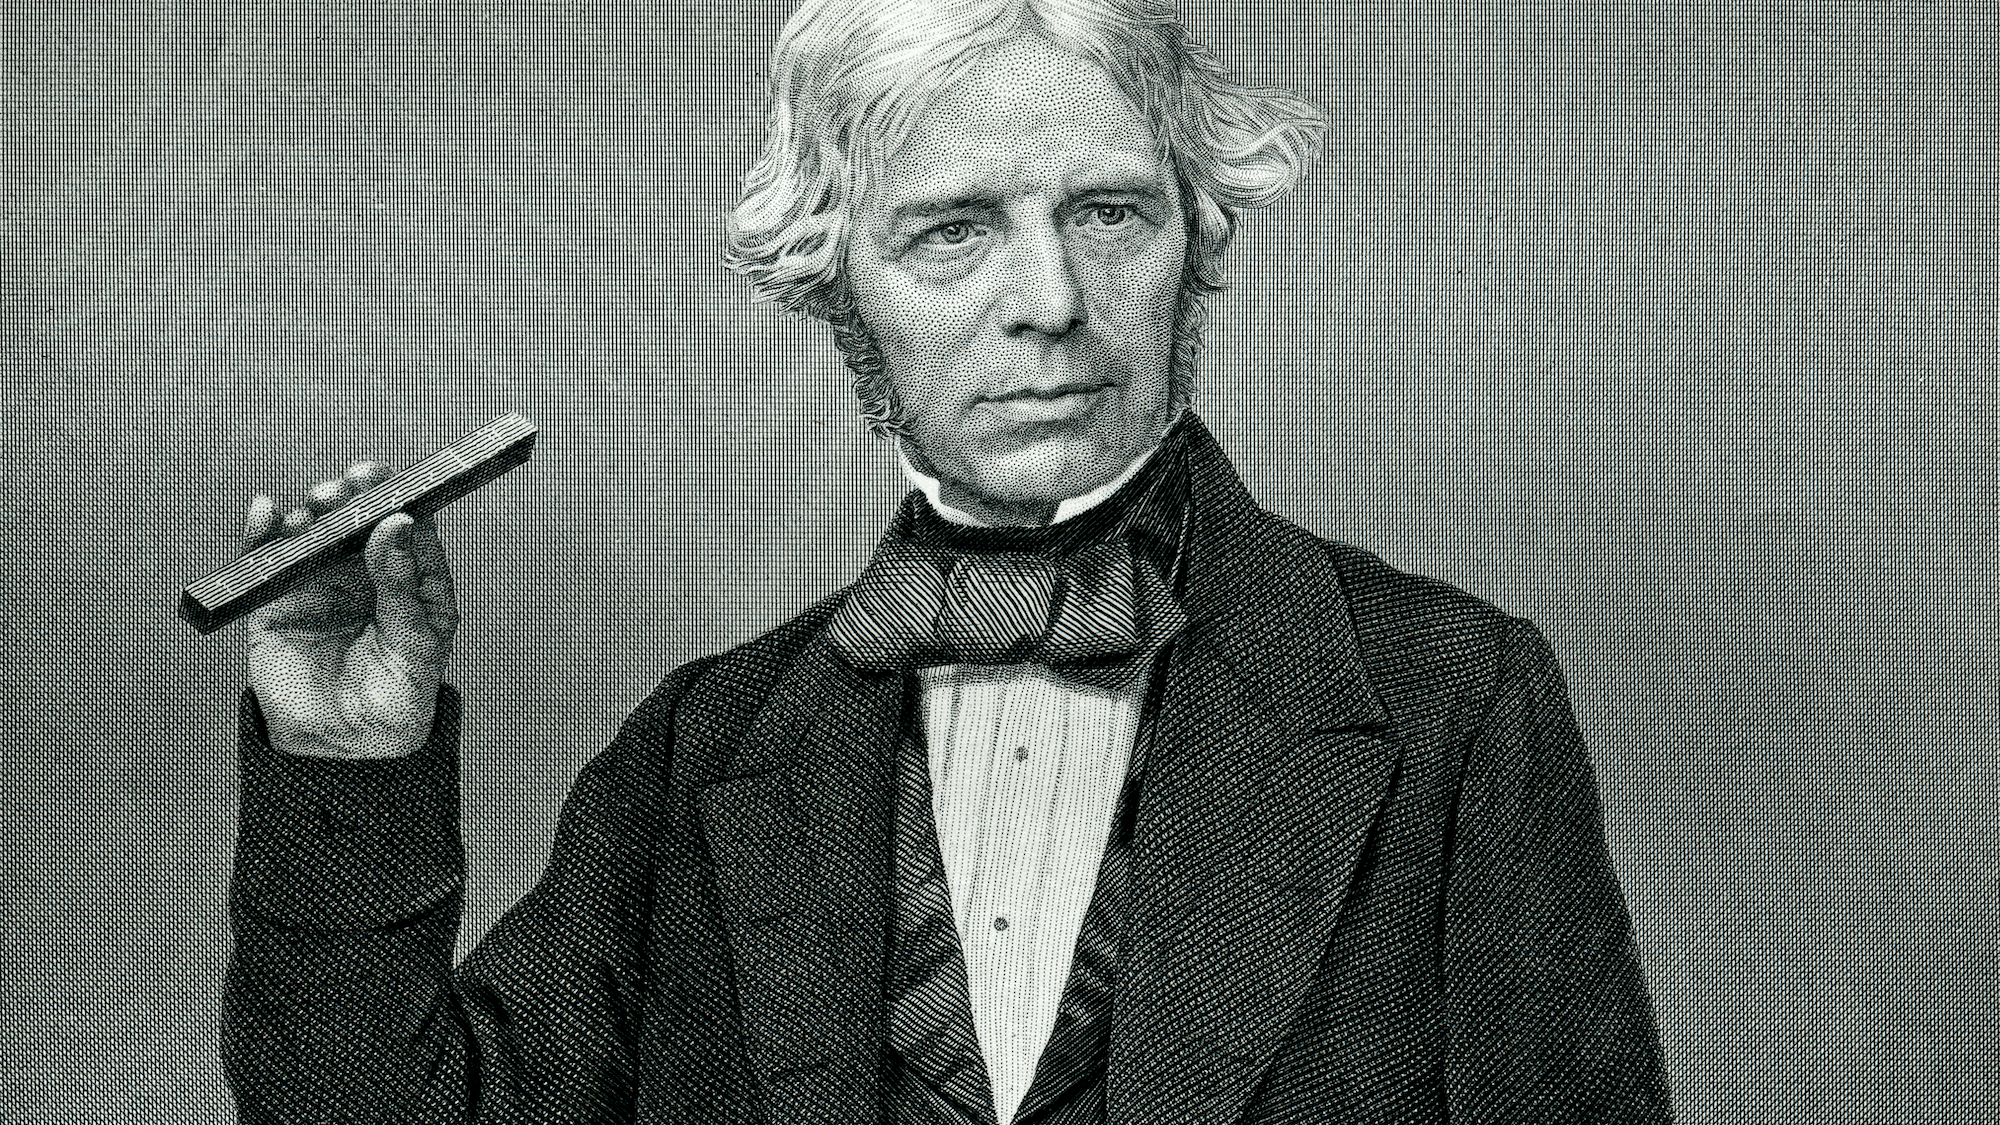 Michael Faraday Inventor of the Electric Motor